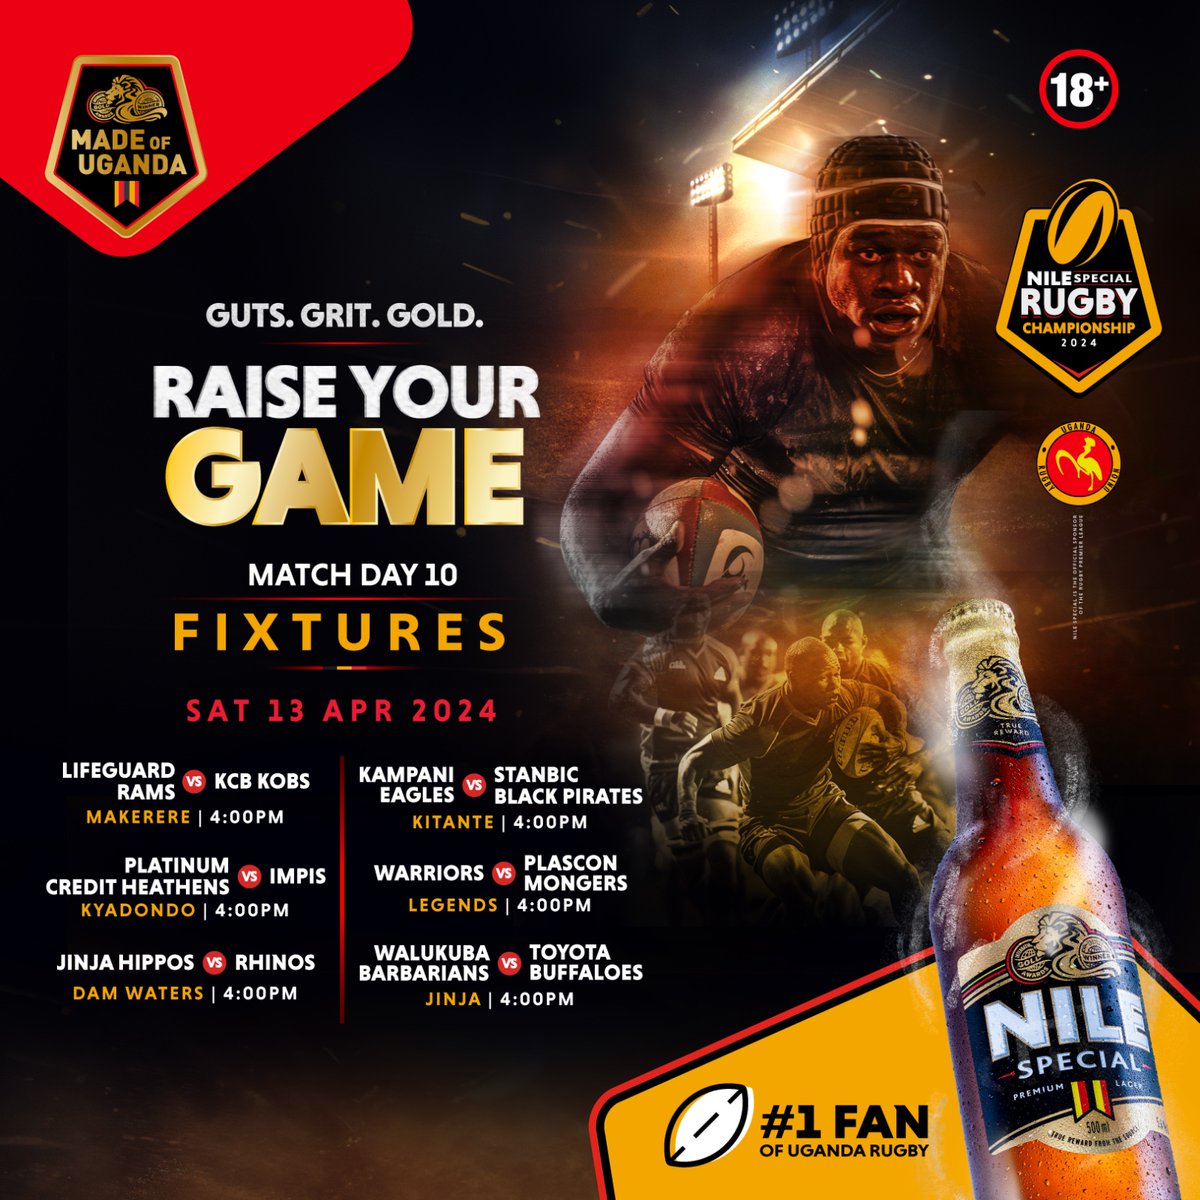 Rugby returns this weekend for both Men and Women! 🏉💪🏾 

Who will reign supreme over their opponents? 
Show your support, wear your colors, and raise your game this Saturday! 

#RaiseYourGame #GutsGritGold #UnmatchedinGold #NSRC2024 #WNSRPL